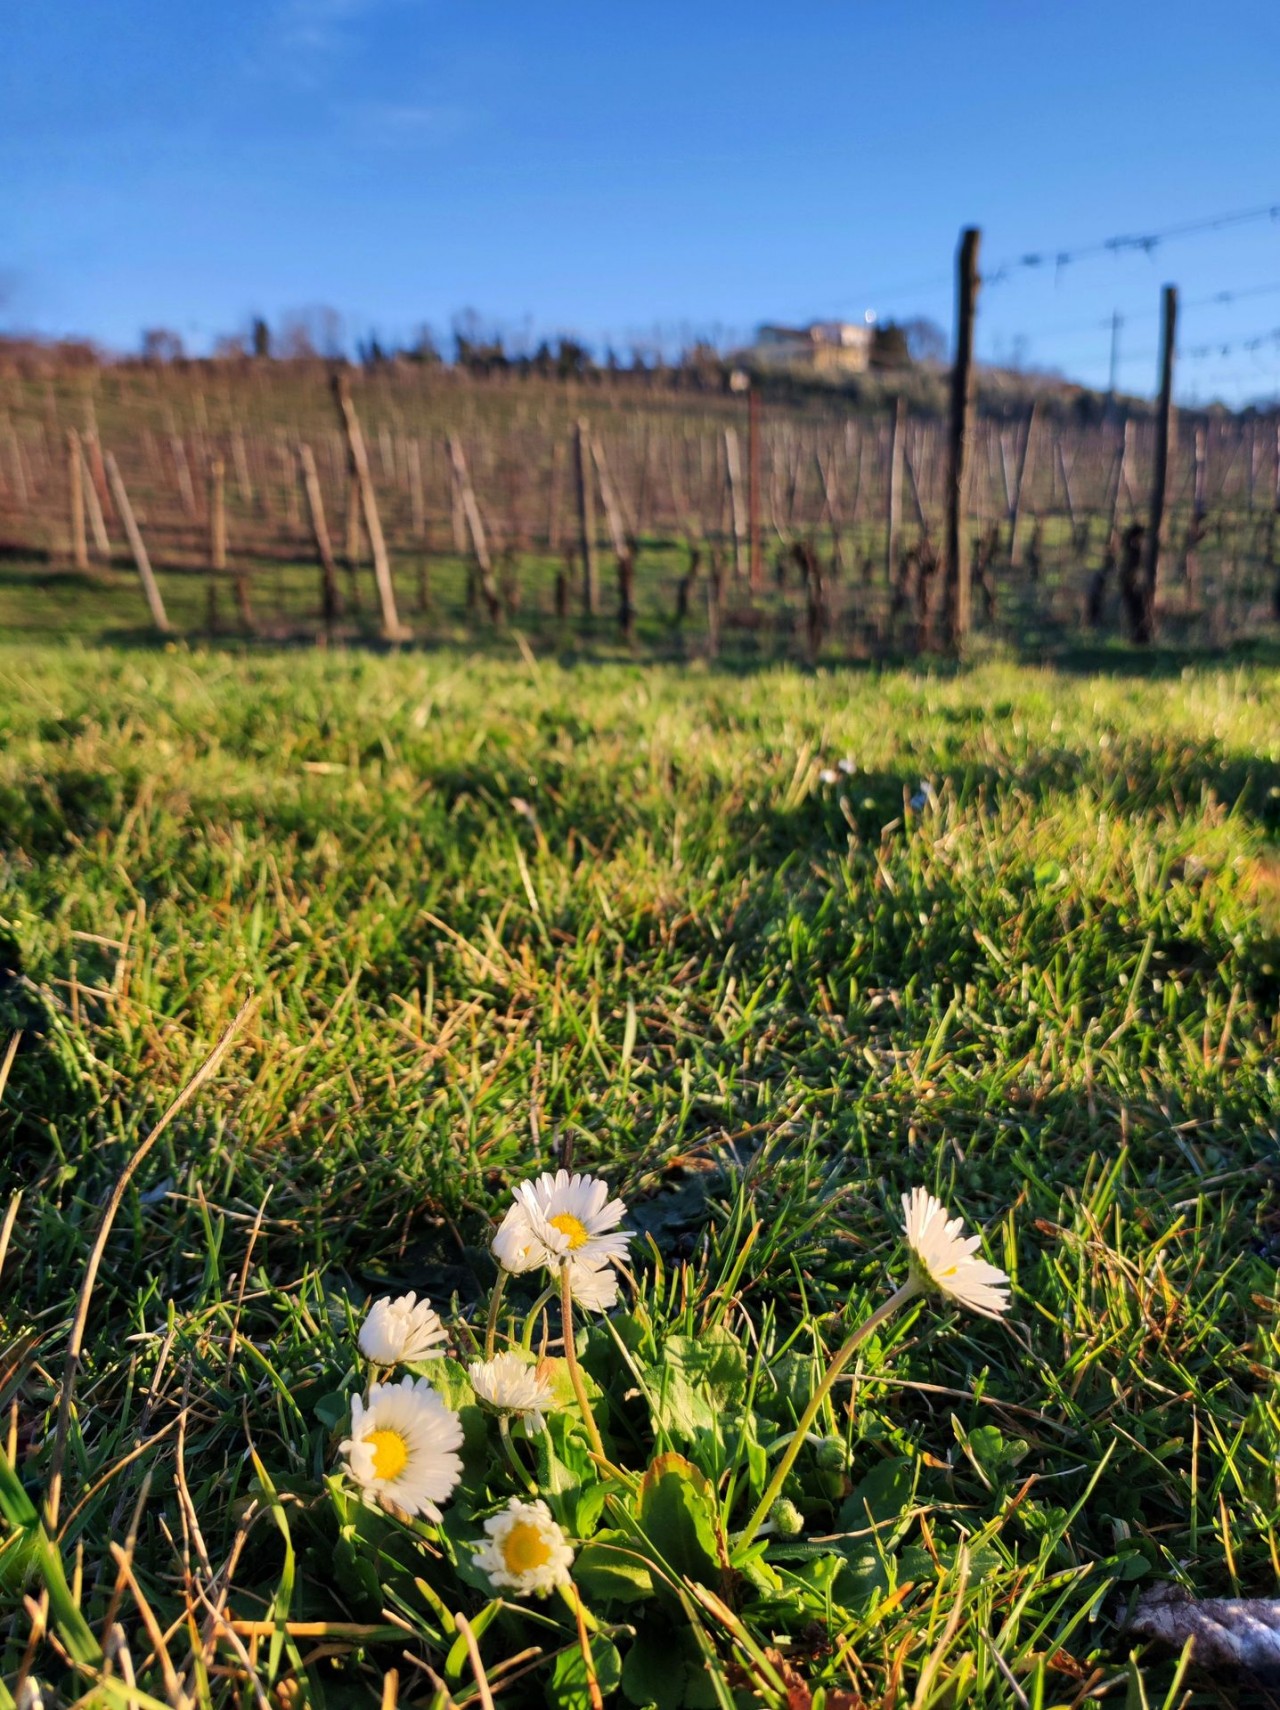 Early Signs of Spring in the Vineyard